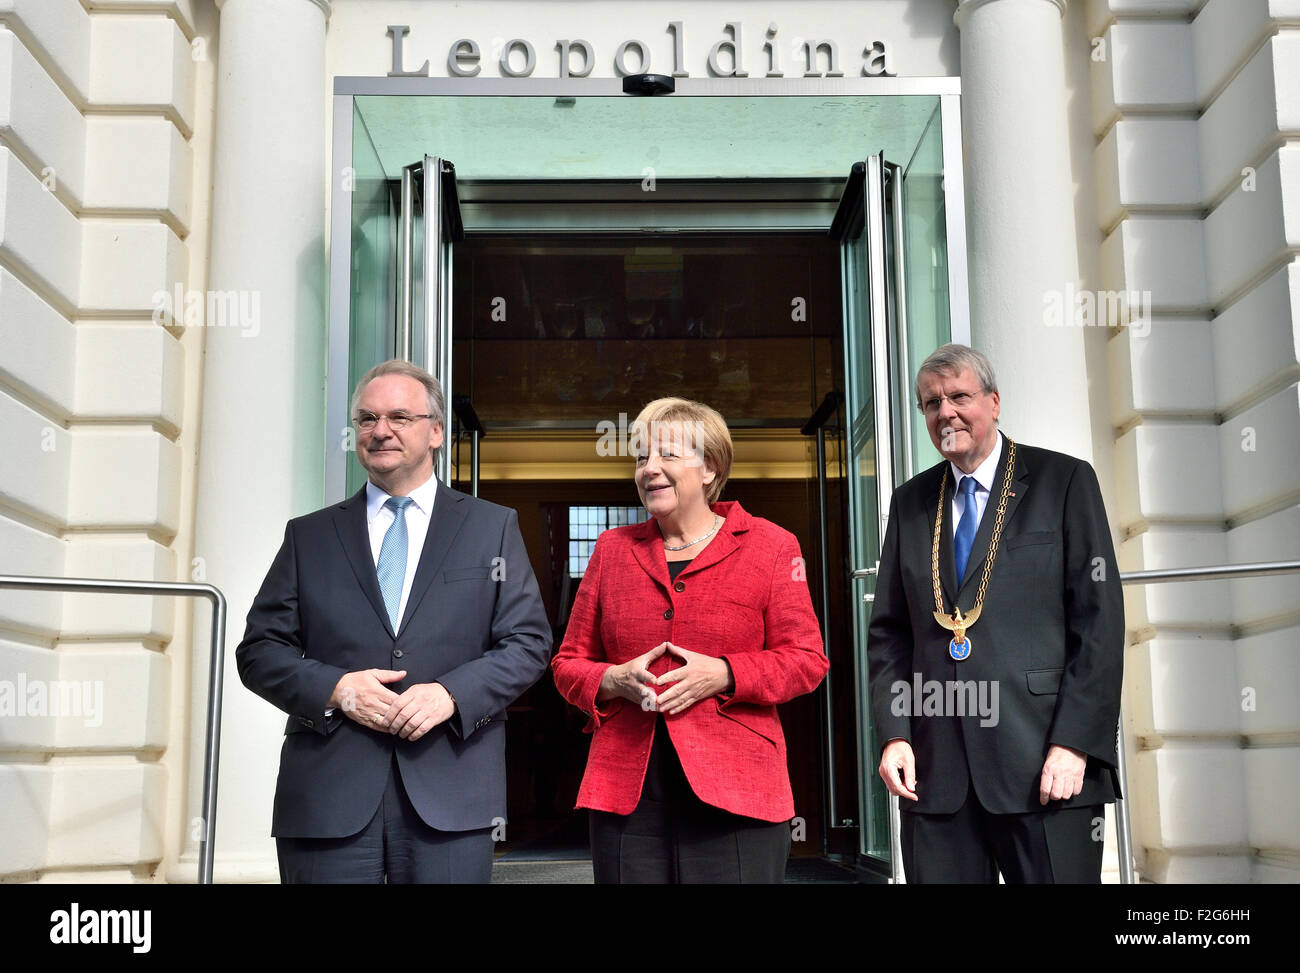 Halle, Germany. 18th Sep, 2015. The Premier of Saxony-Anhalt Reiner Haseloff (CDU, L) and the President of the Leopoldina German National Academy for Sciences, Joerg Hacker greet German Chancellor (CDU) Angela Merkel at the beginning of the acadamy's annual meeting in Halle, Germany, 18 September 2015. The event this year is being held under the title 'Symmetry and asymmetry in science and art' Photo: HENDRIK SCHMIDT/DPA/Alamy Live News Stock Photo